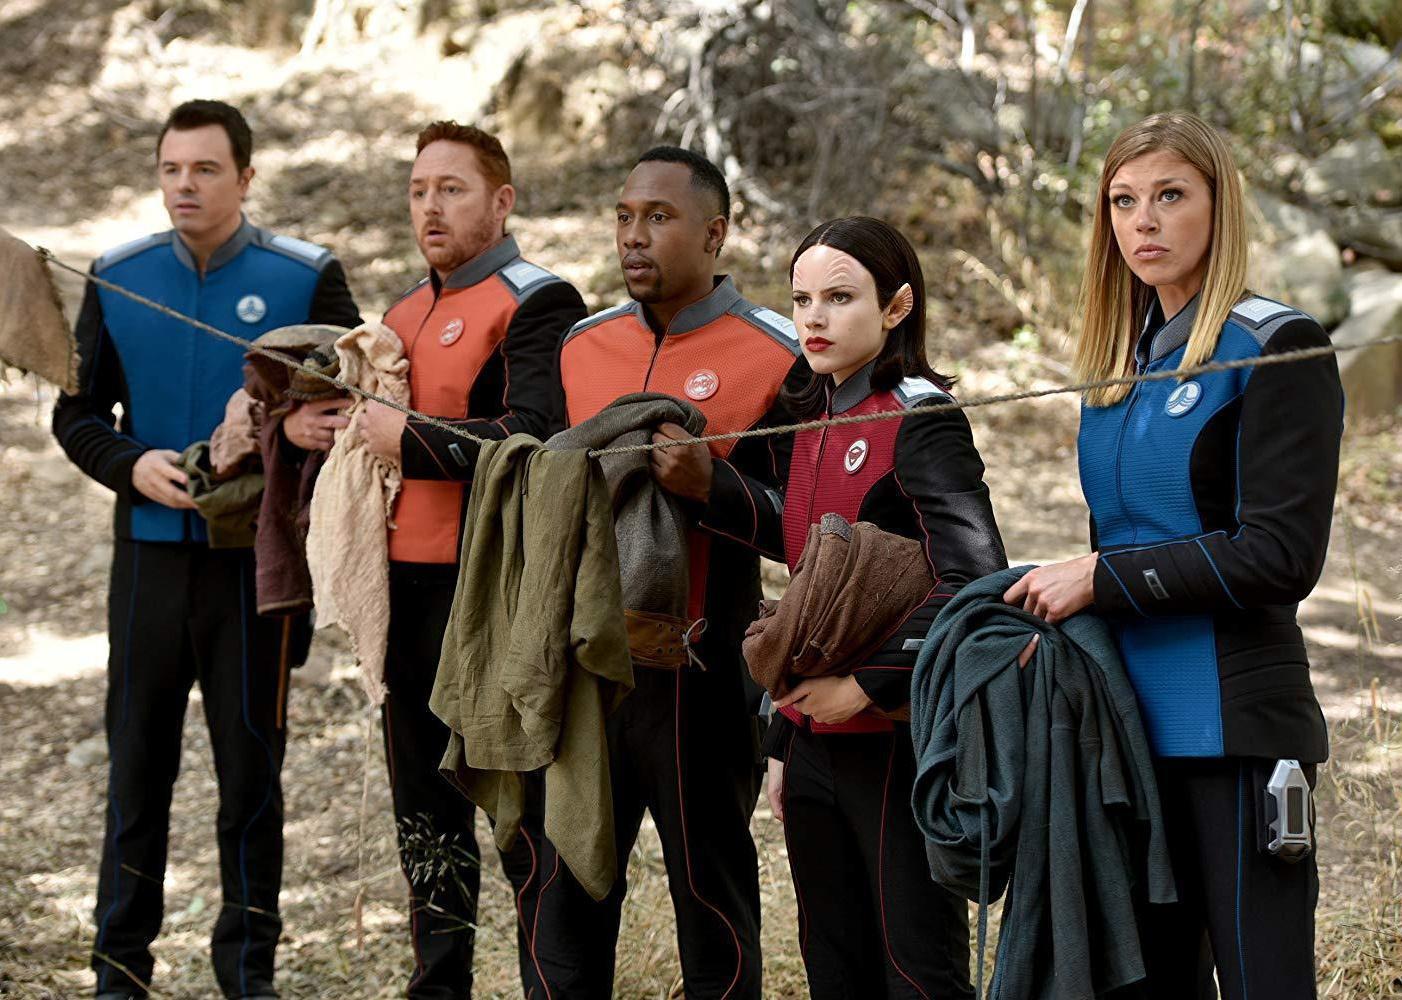 Actors in an episode of ‘The Orville’.